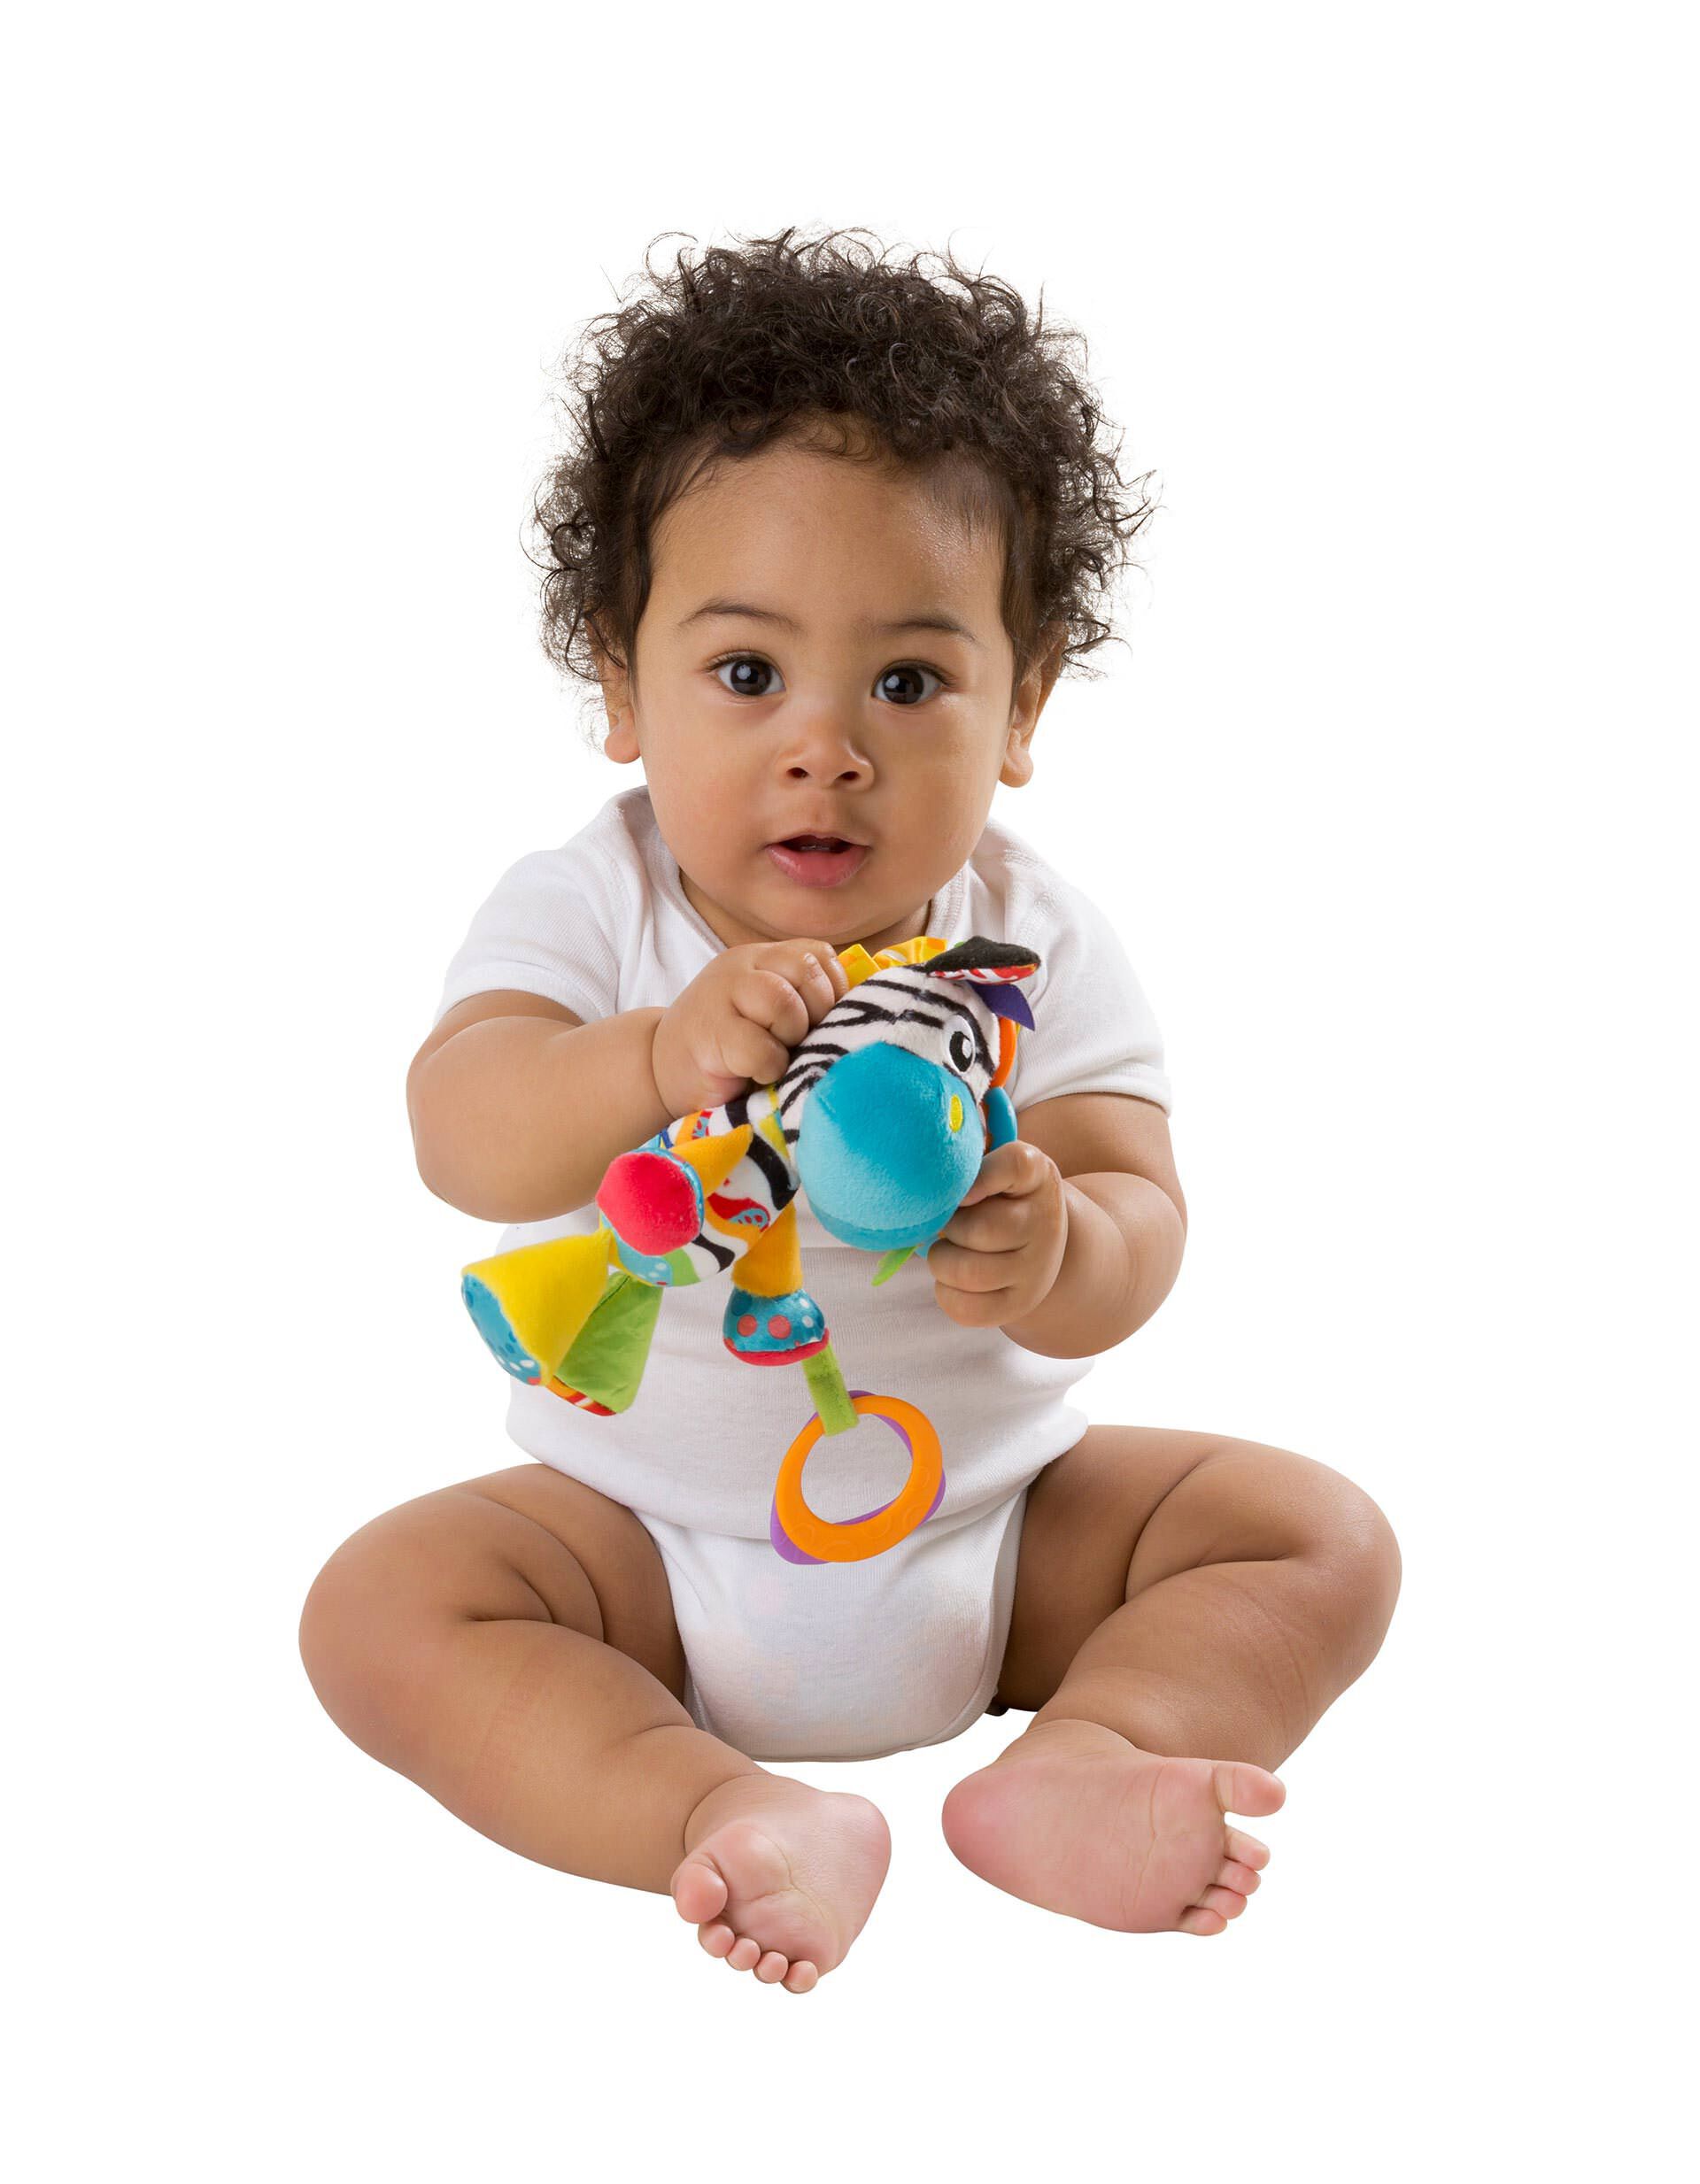 baby teether toys online